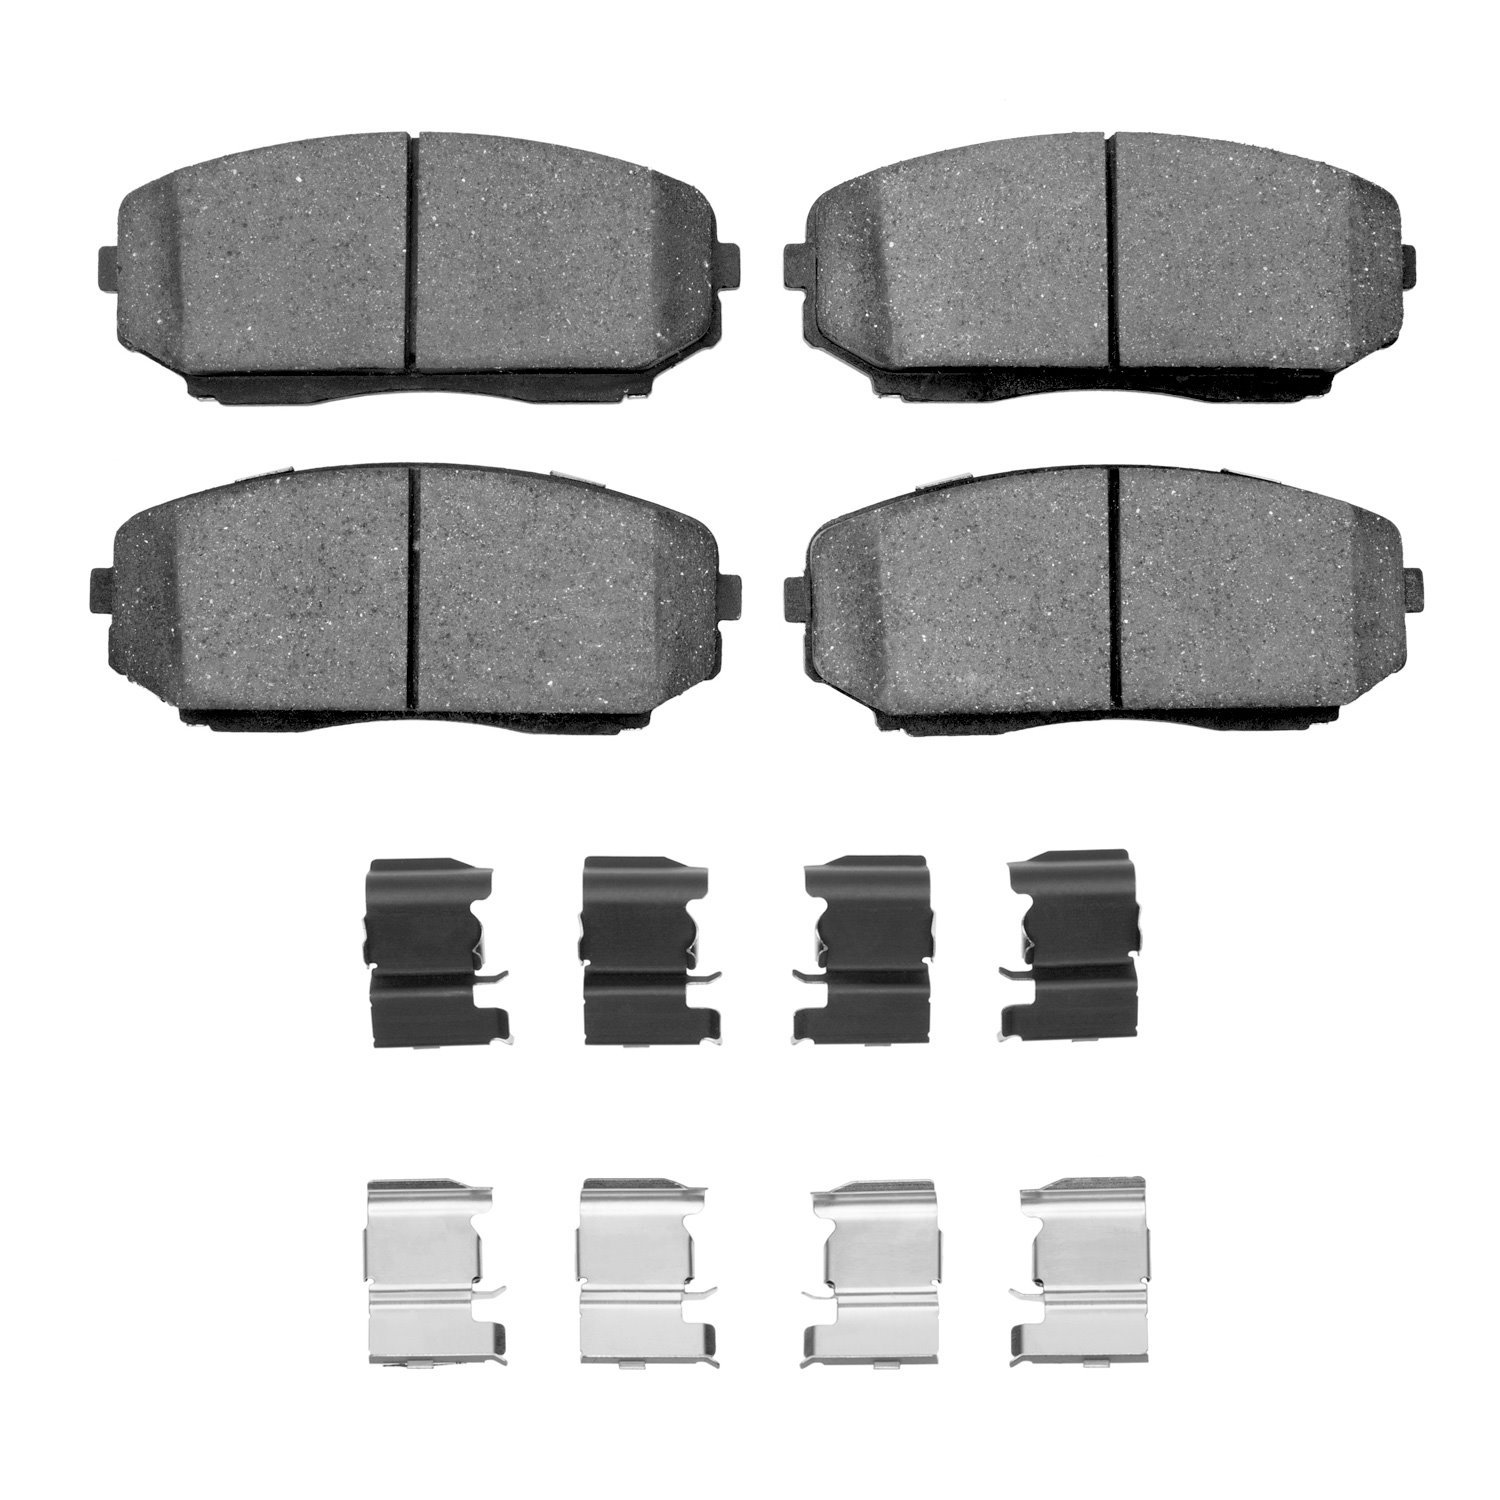 1310-1258-01 3000-Series Ceramic Brake Pads & Hardware Kit, Fits Select Ford/Lincoln/Mercury/Mazda, Position: Front